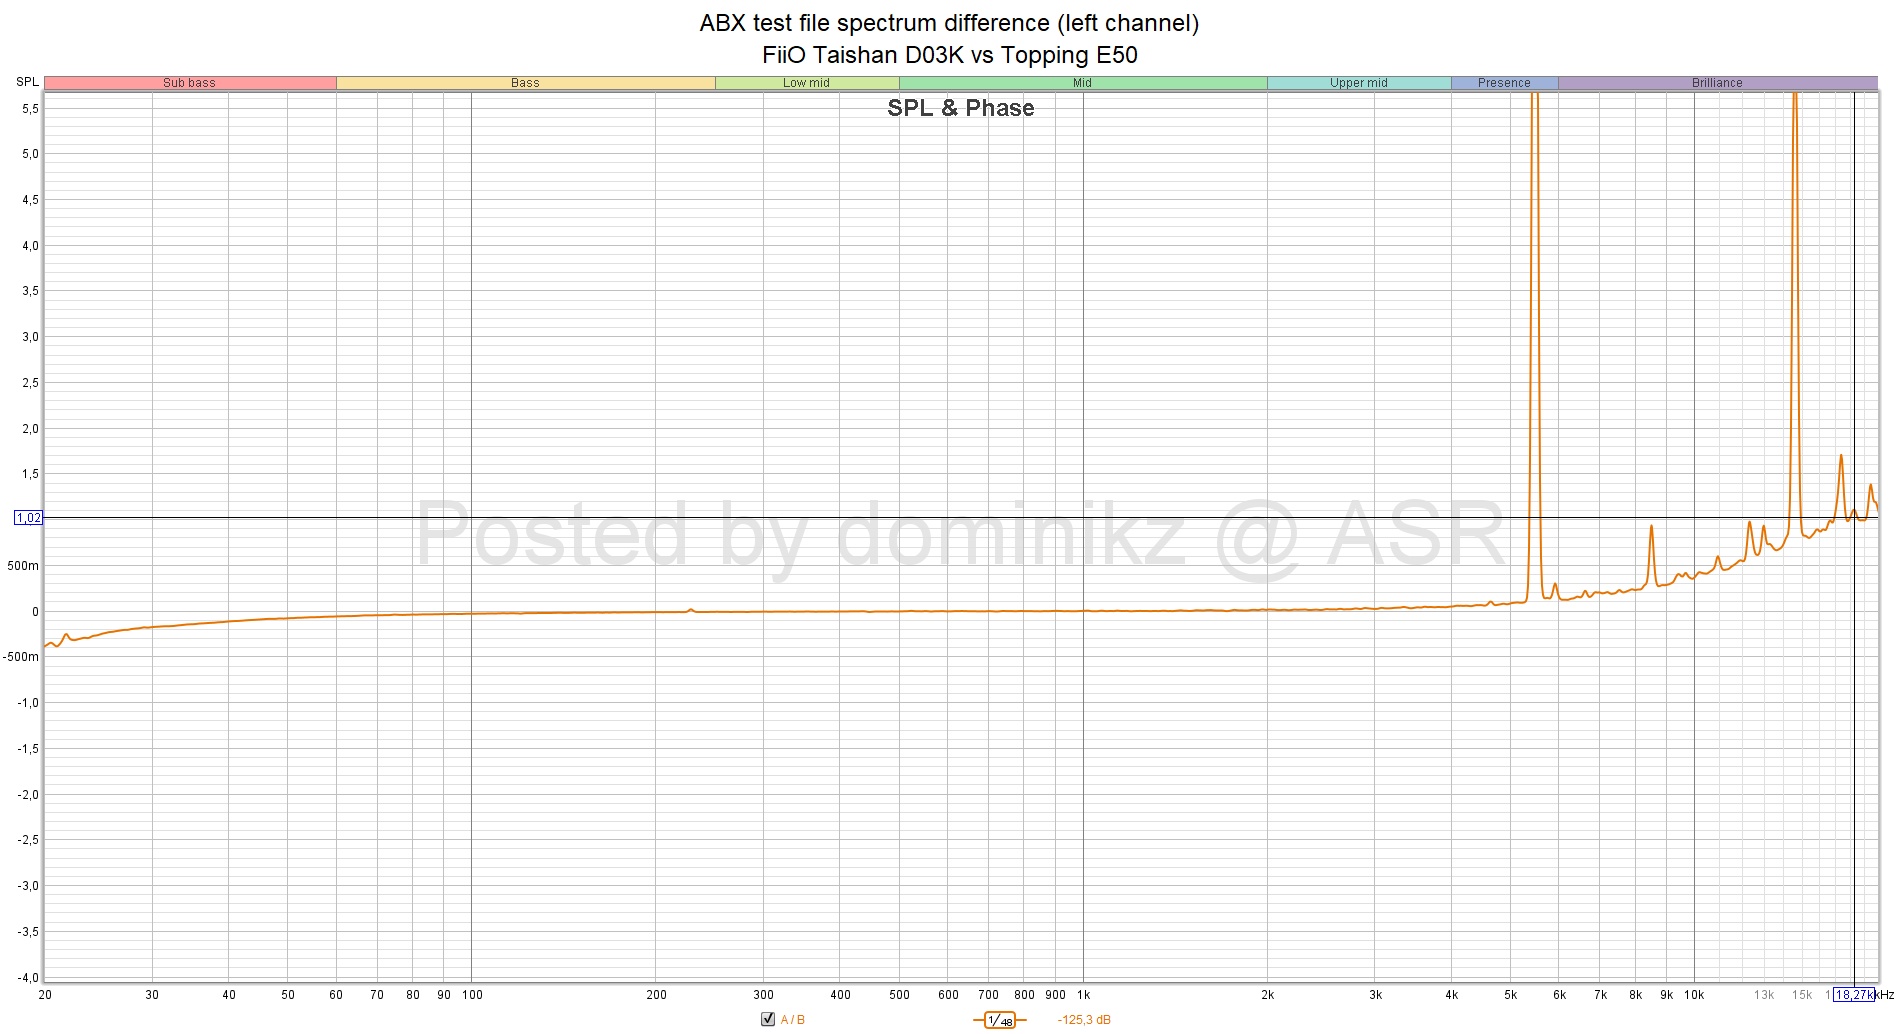 ABX test file spectrum difference (left channel) - FiiO Taishan D03K vs Topping E50.jpg